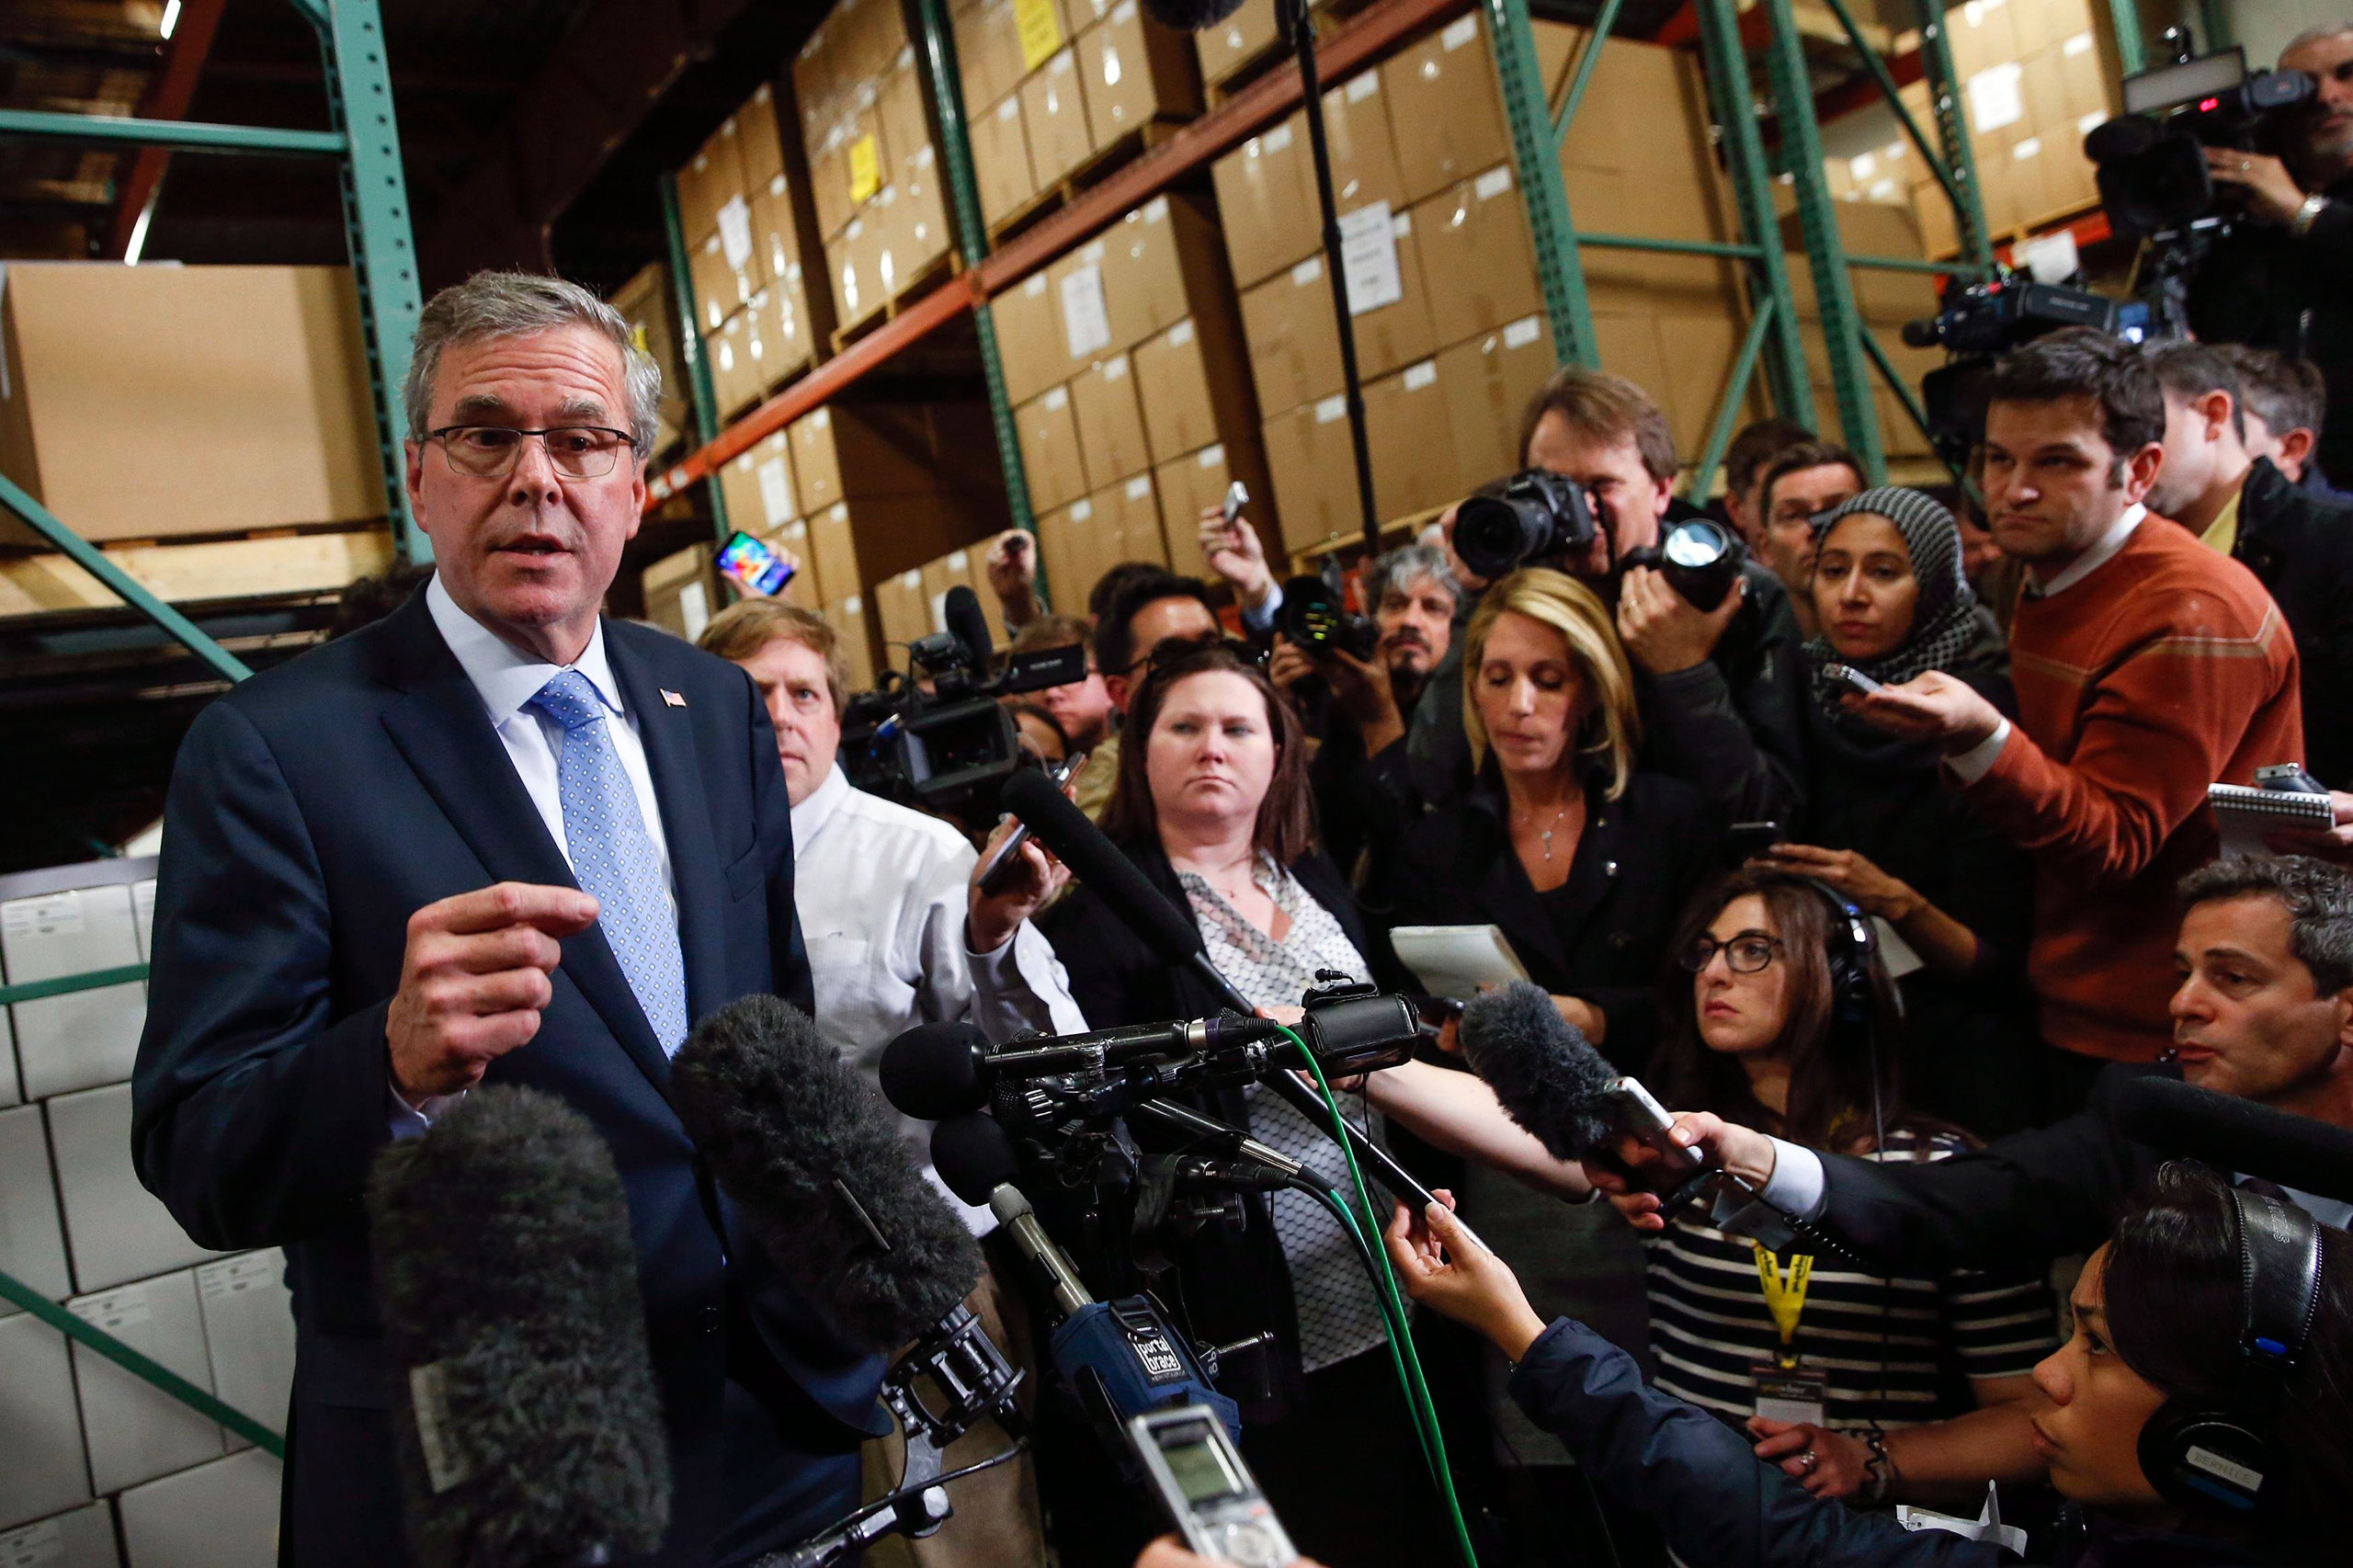 Former Florida Governor Jeb Bush speaks to the media after visiting Integra Biosciences during a campaign stop in Hudson, New Hampshire March 13, 2015. (Shannon Stapleton—Reuters)